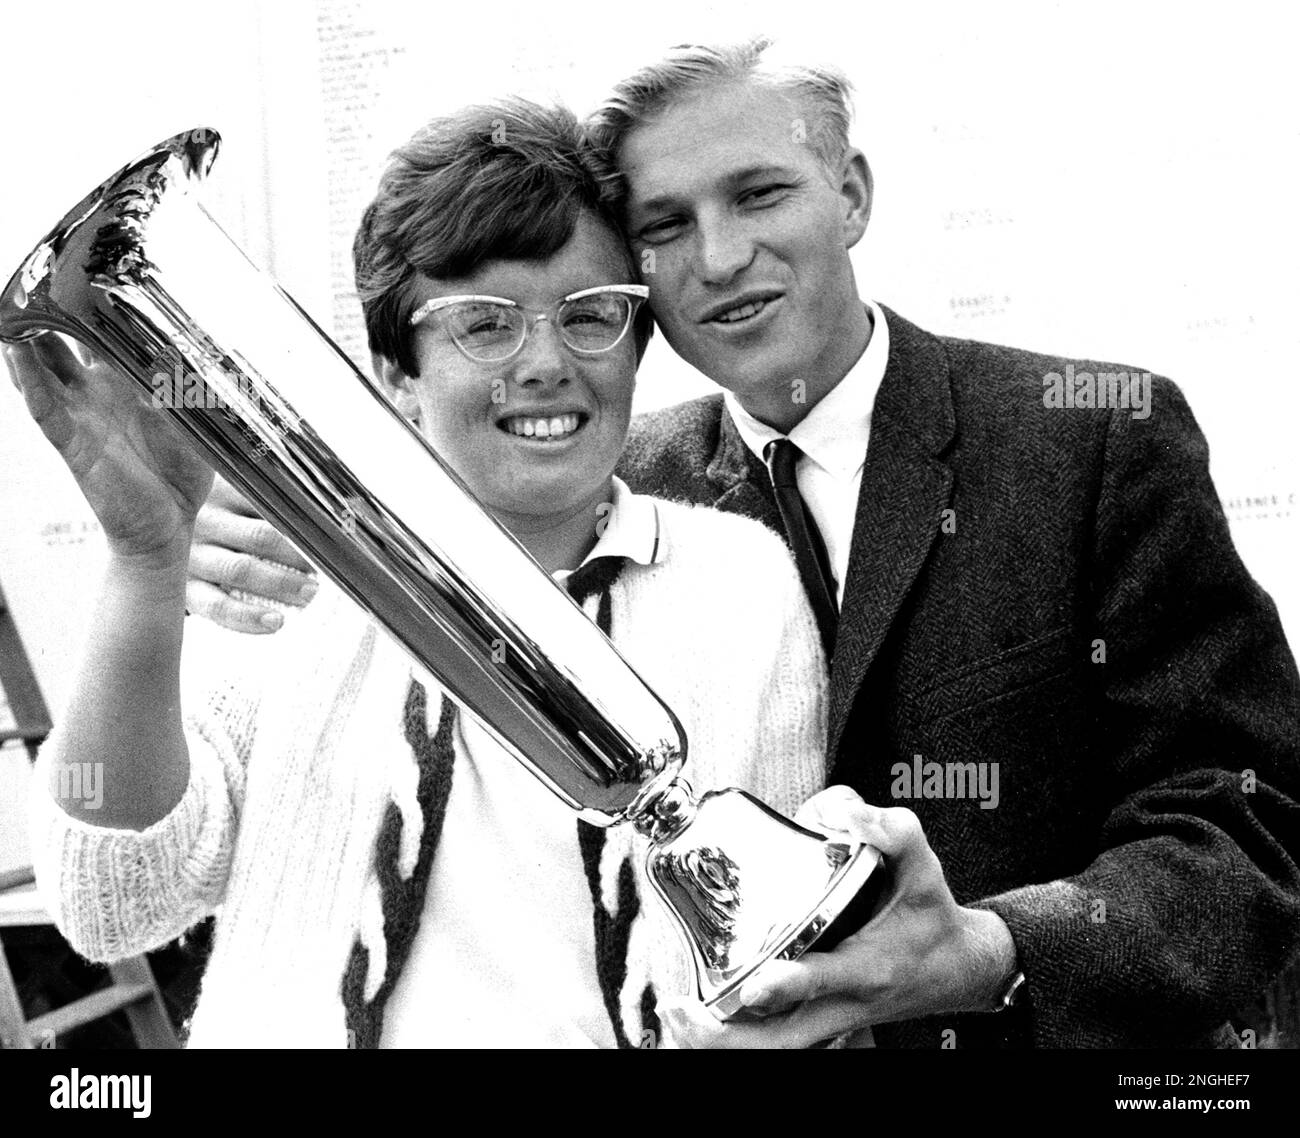 Billie Jean King, of Long Beach, Ca., U.S.A., holds her trophy as she is  congratulated by her husband, Larry King, after winning the U.S. National  tennis championships at Forest Hills, Queens, N.Y.,